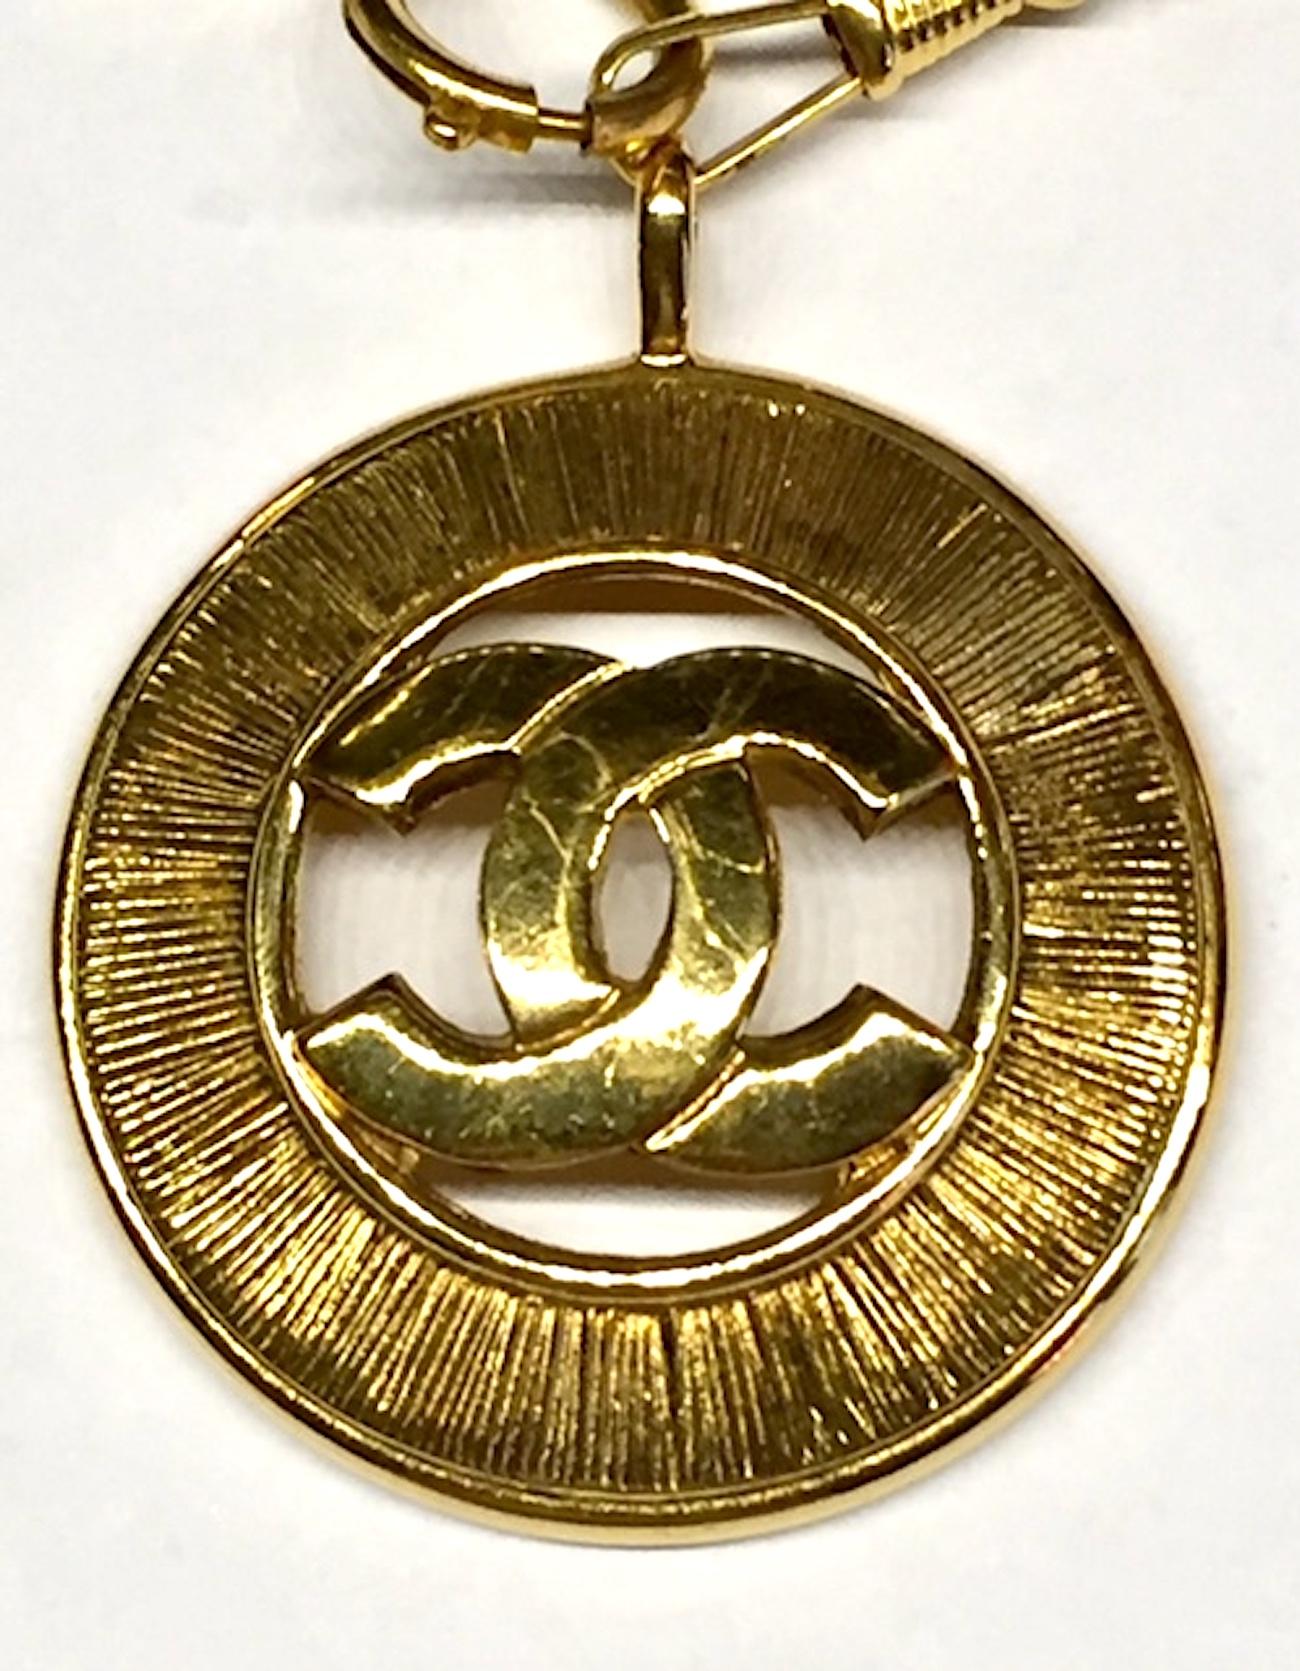 A wonderful early 1980s Chanel necklace with large round cut out CC logo pendant. The pendant hangs on a heavy large link watch chain style necklace. Each link is 1/4